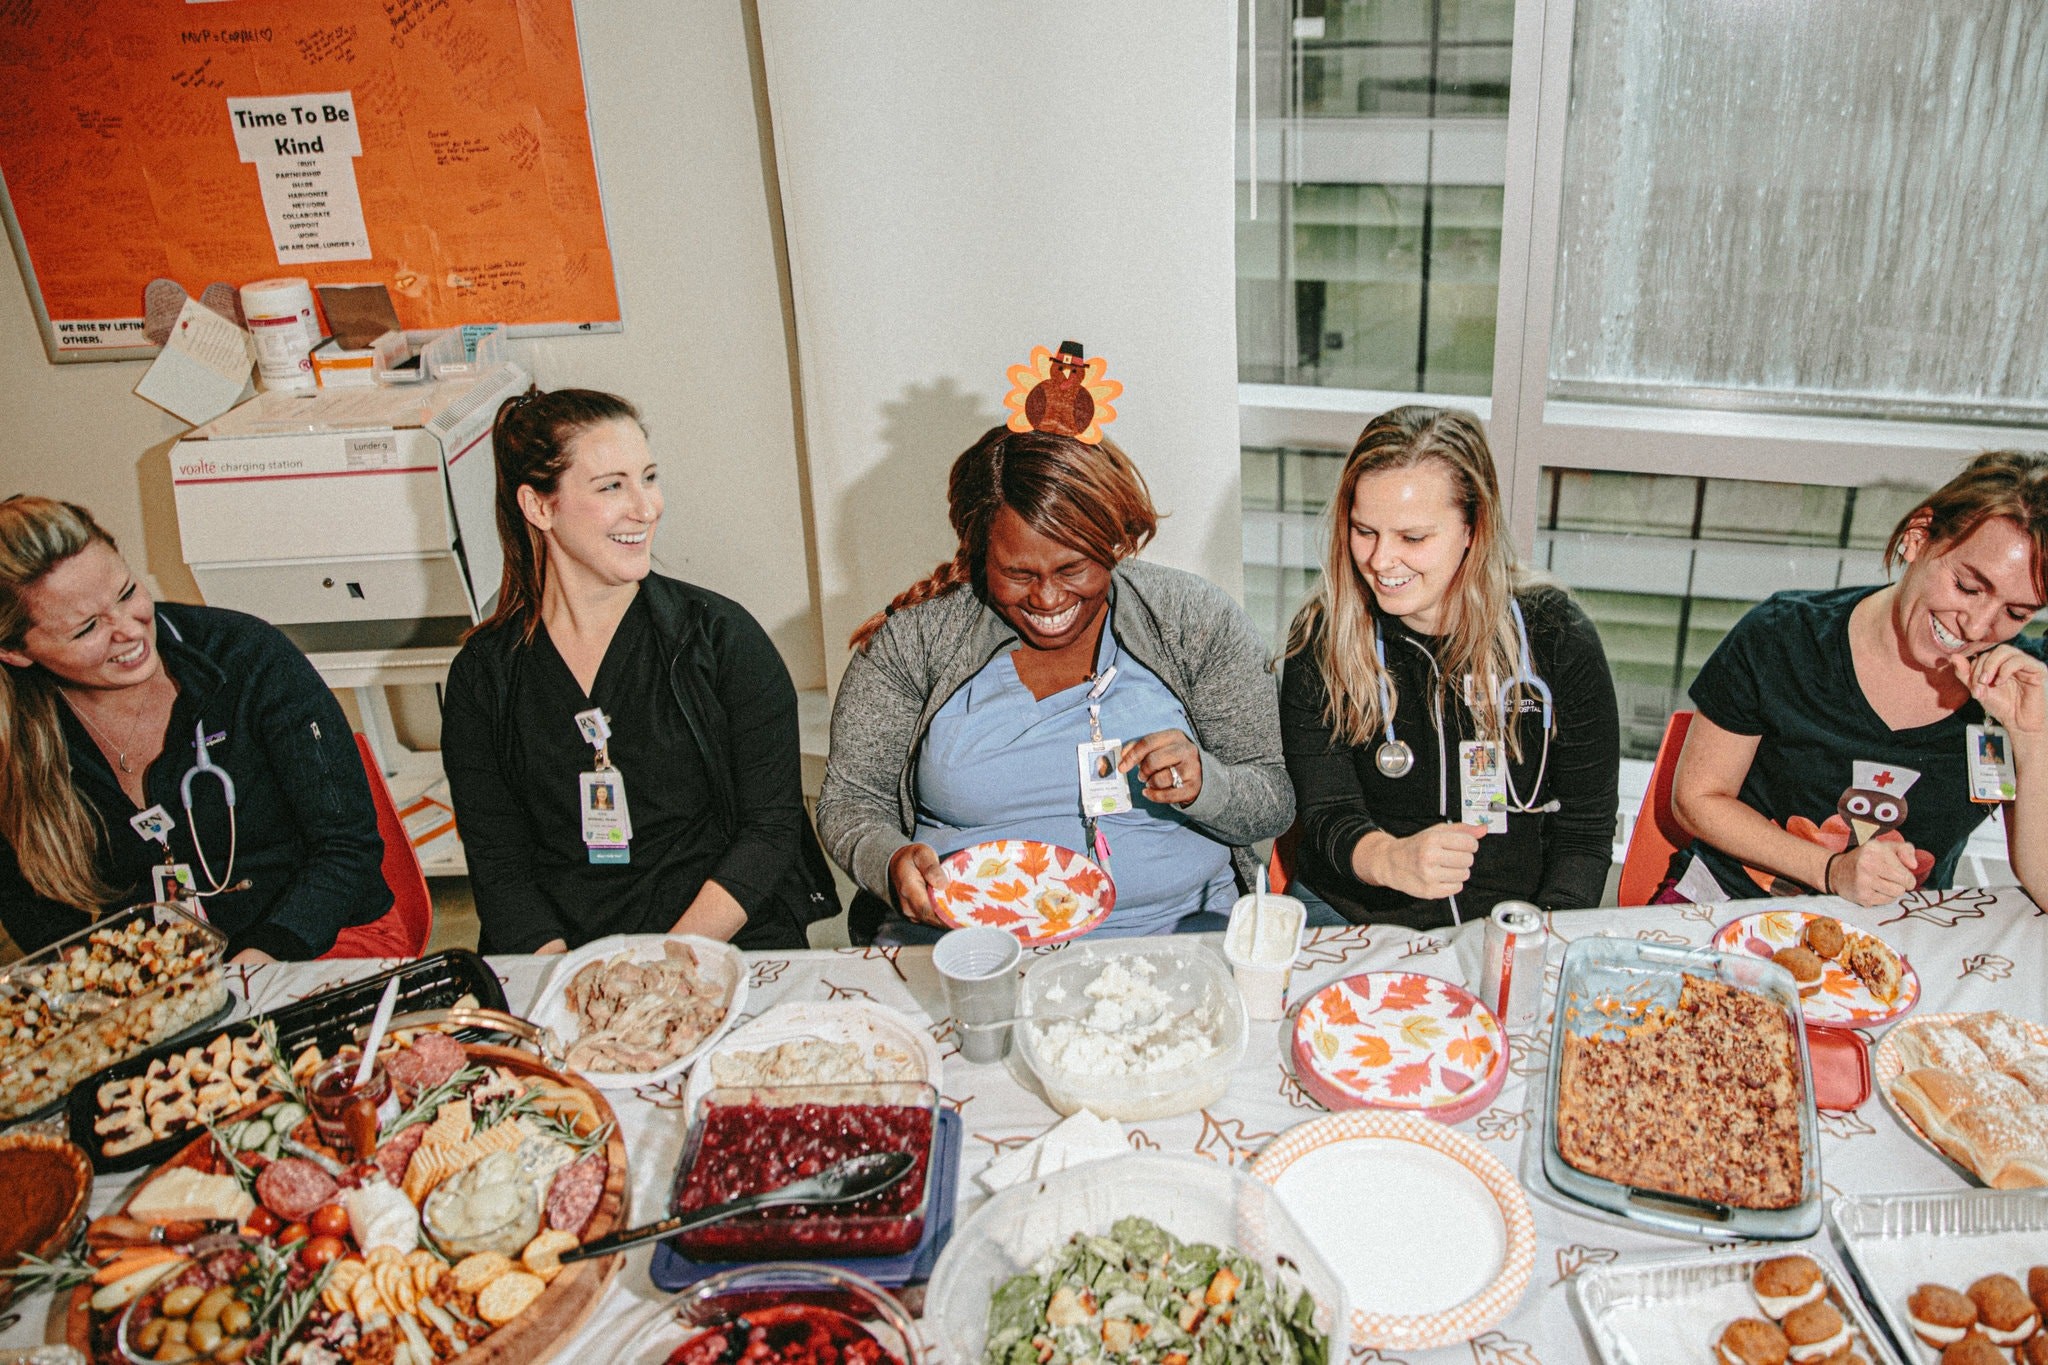 From the Hospital to an Old Navy Thanksgiving at Work